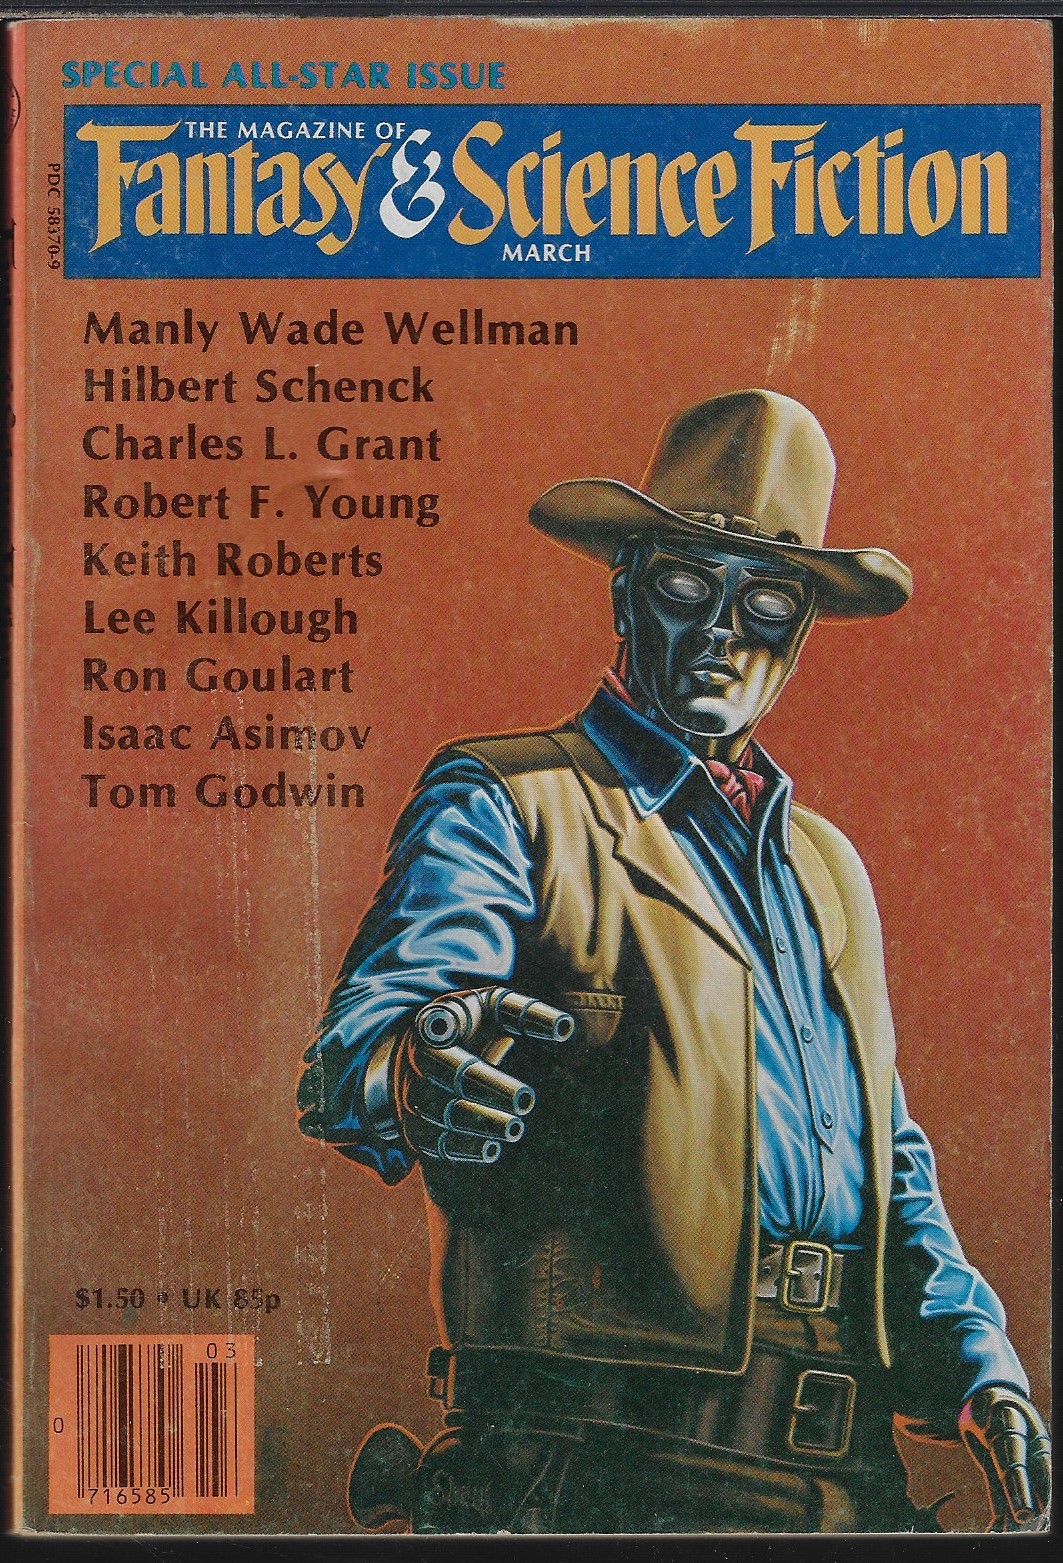 F&SF (HILBERT SCHENCK; KEITH ROBERTS; MANLY WADE WELLMAN; TOM GODWIN; RON GOULART; CHARLES L. GRANT; DAVID LUBKIN; ROBERT F. YOUNG; LEE KILLOUGH) - The Magazine of Fantasy and Science Fiction (F&Sf): March, Mar. 1980